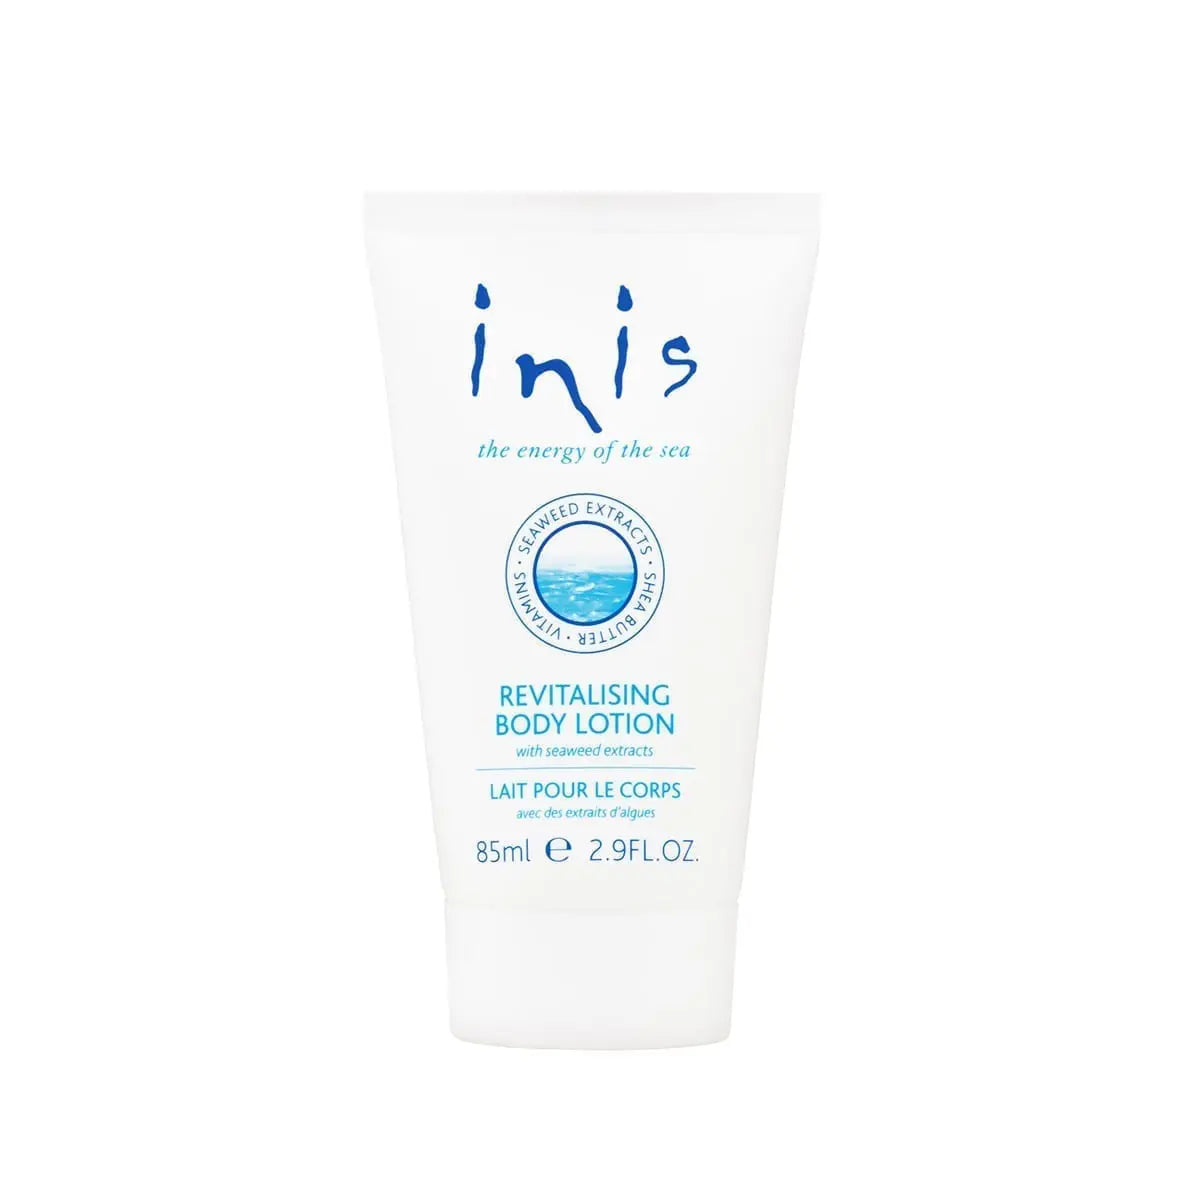 Inis Travel Body Lotion